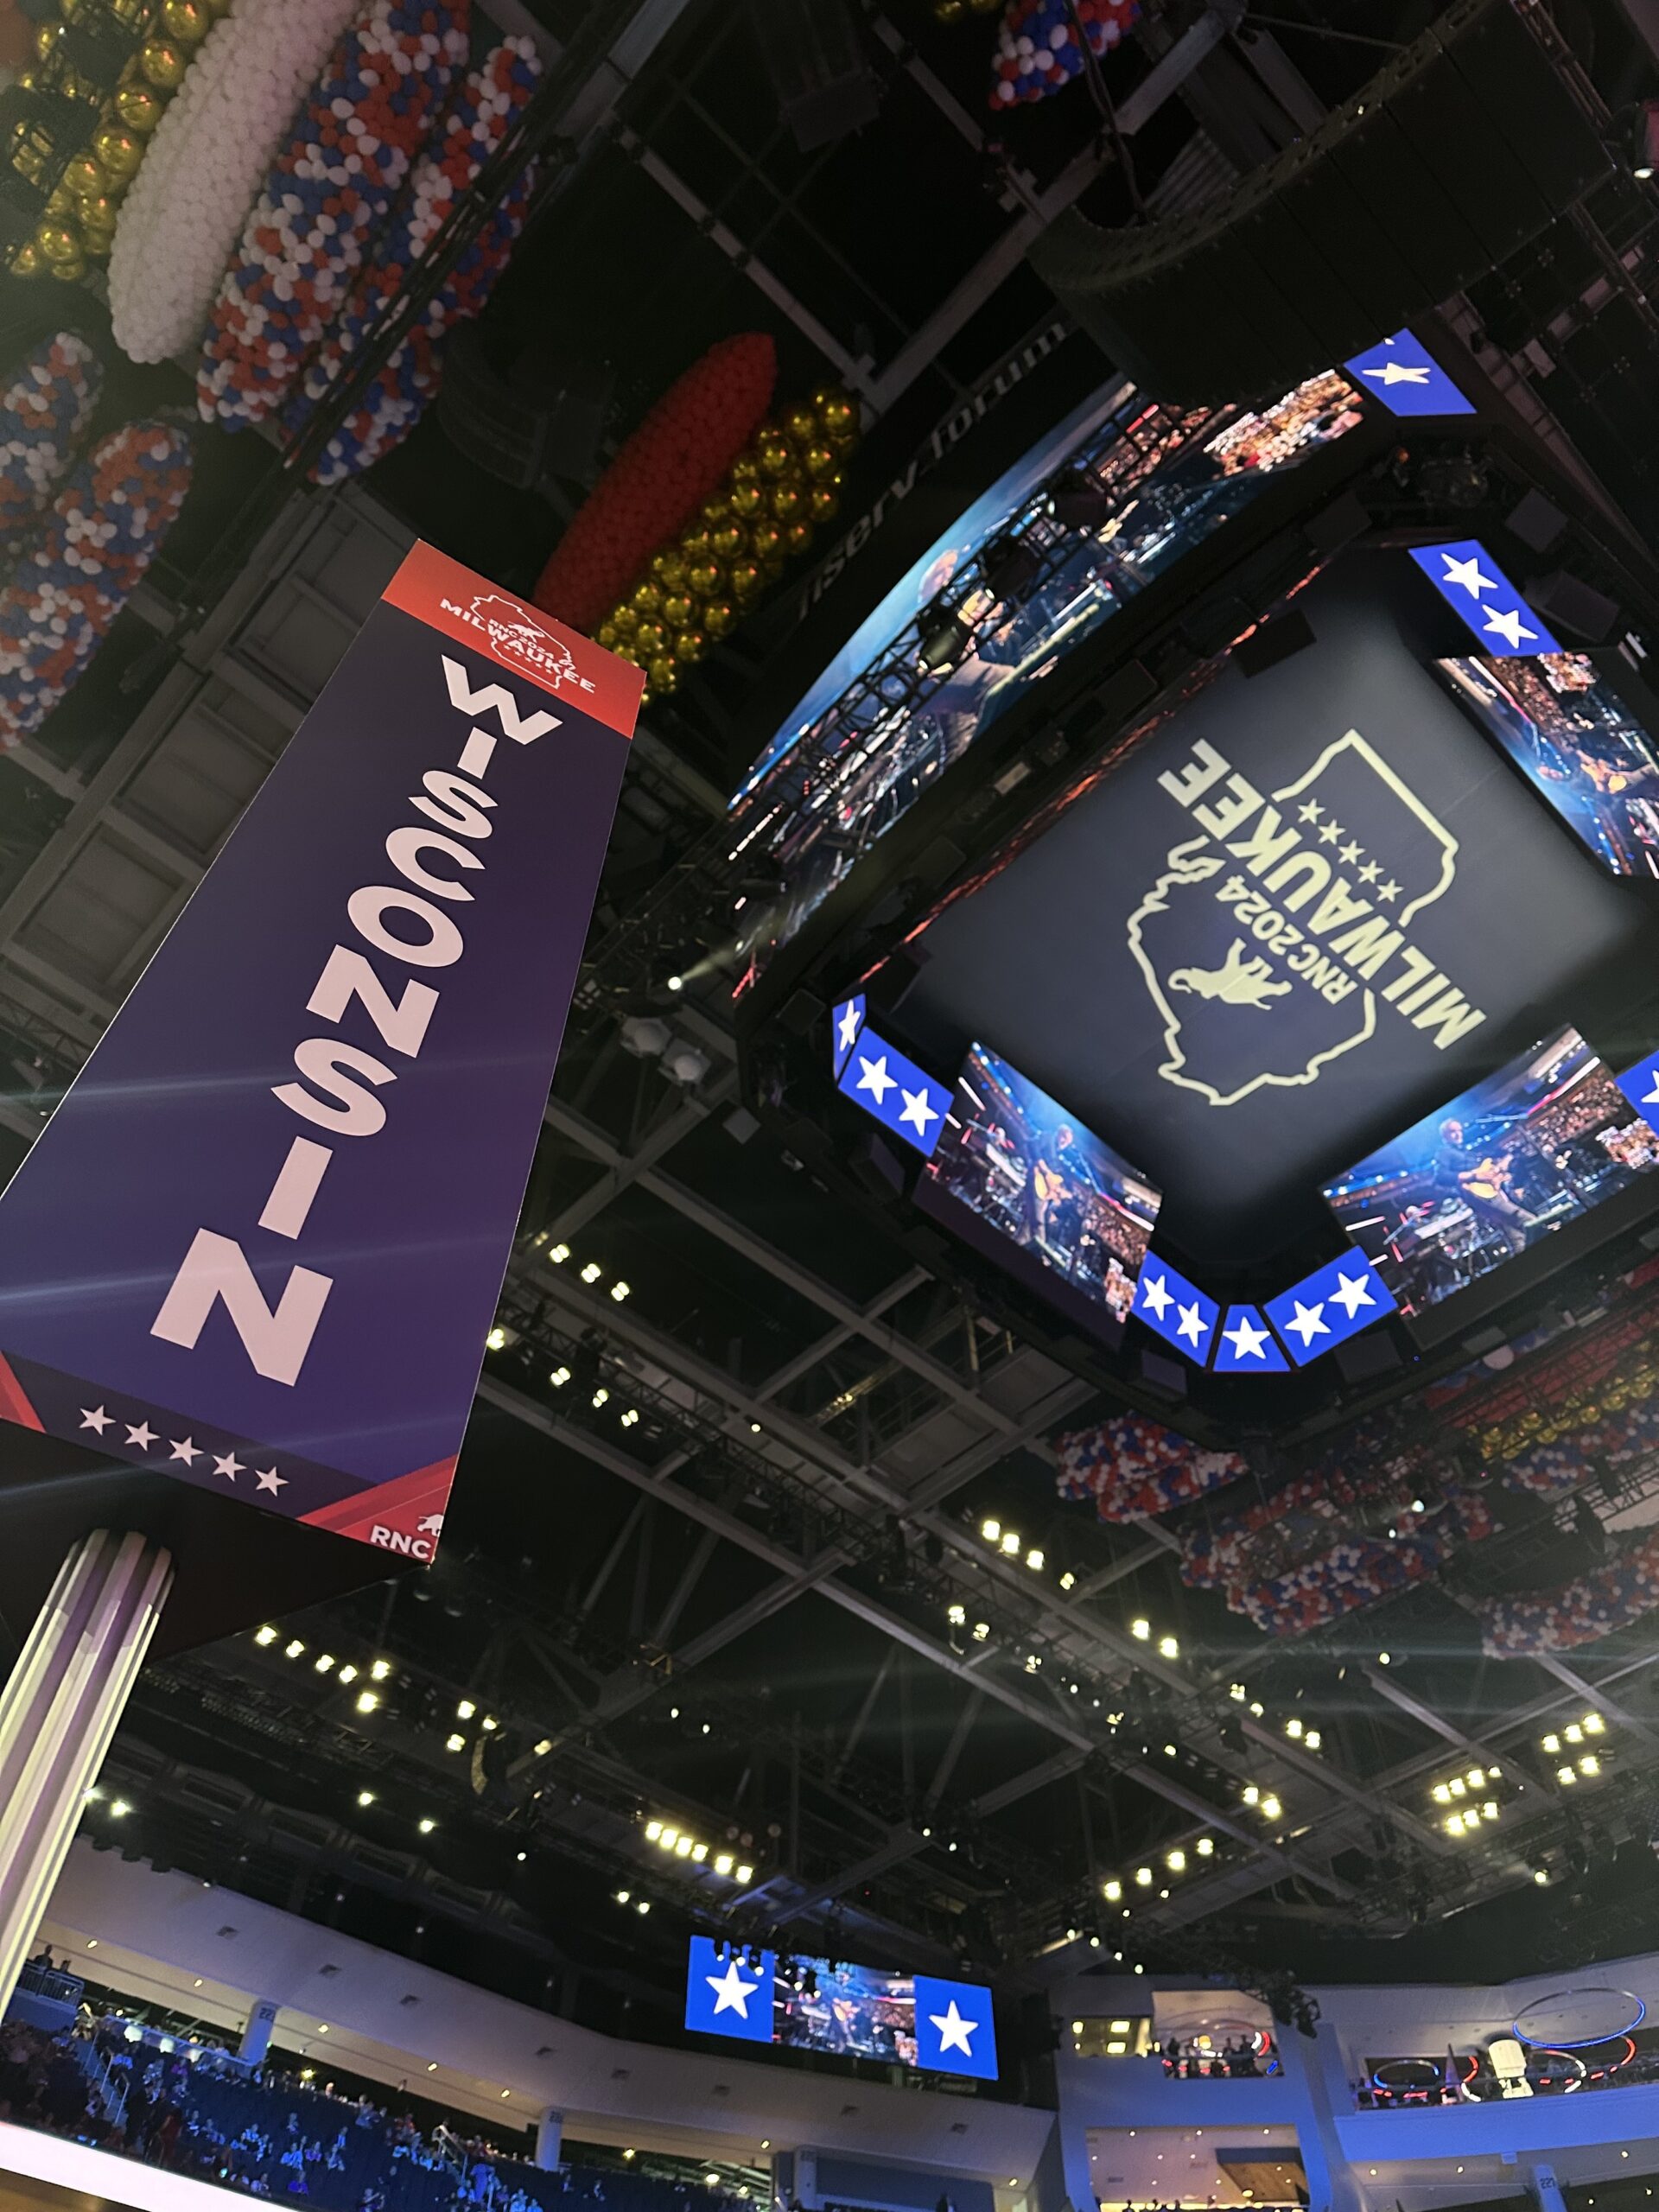 A vertical sign reading "Wisconsin" is shown on the left side of the image, with the RNC roof behind the sign on the right side of the image. The center of the ceiling shows a Wisconsin state outline with "RNC 2024 Milwaukee" written across it.